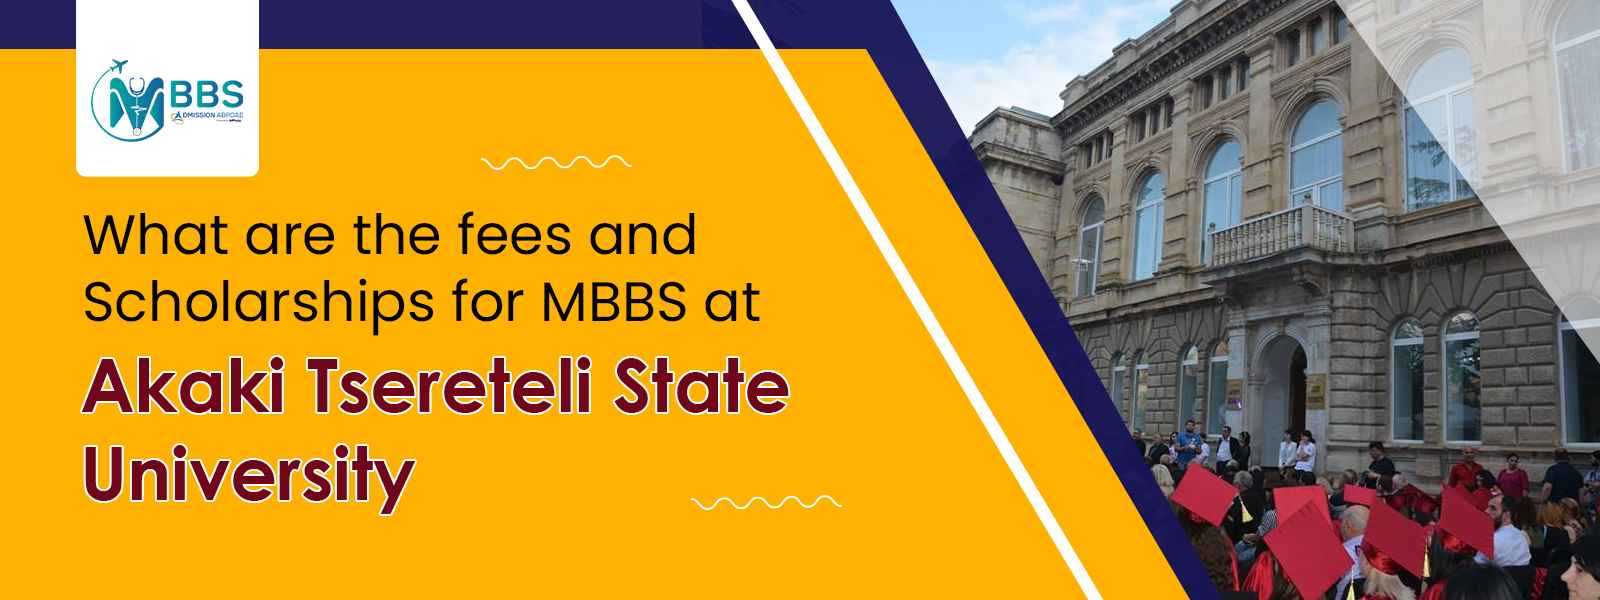 What are the fees and Scholarships for MBBS at Akaki Tsereteli State University?